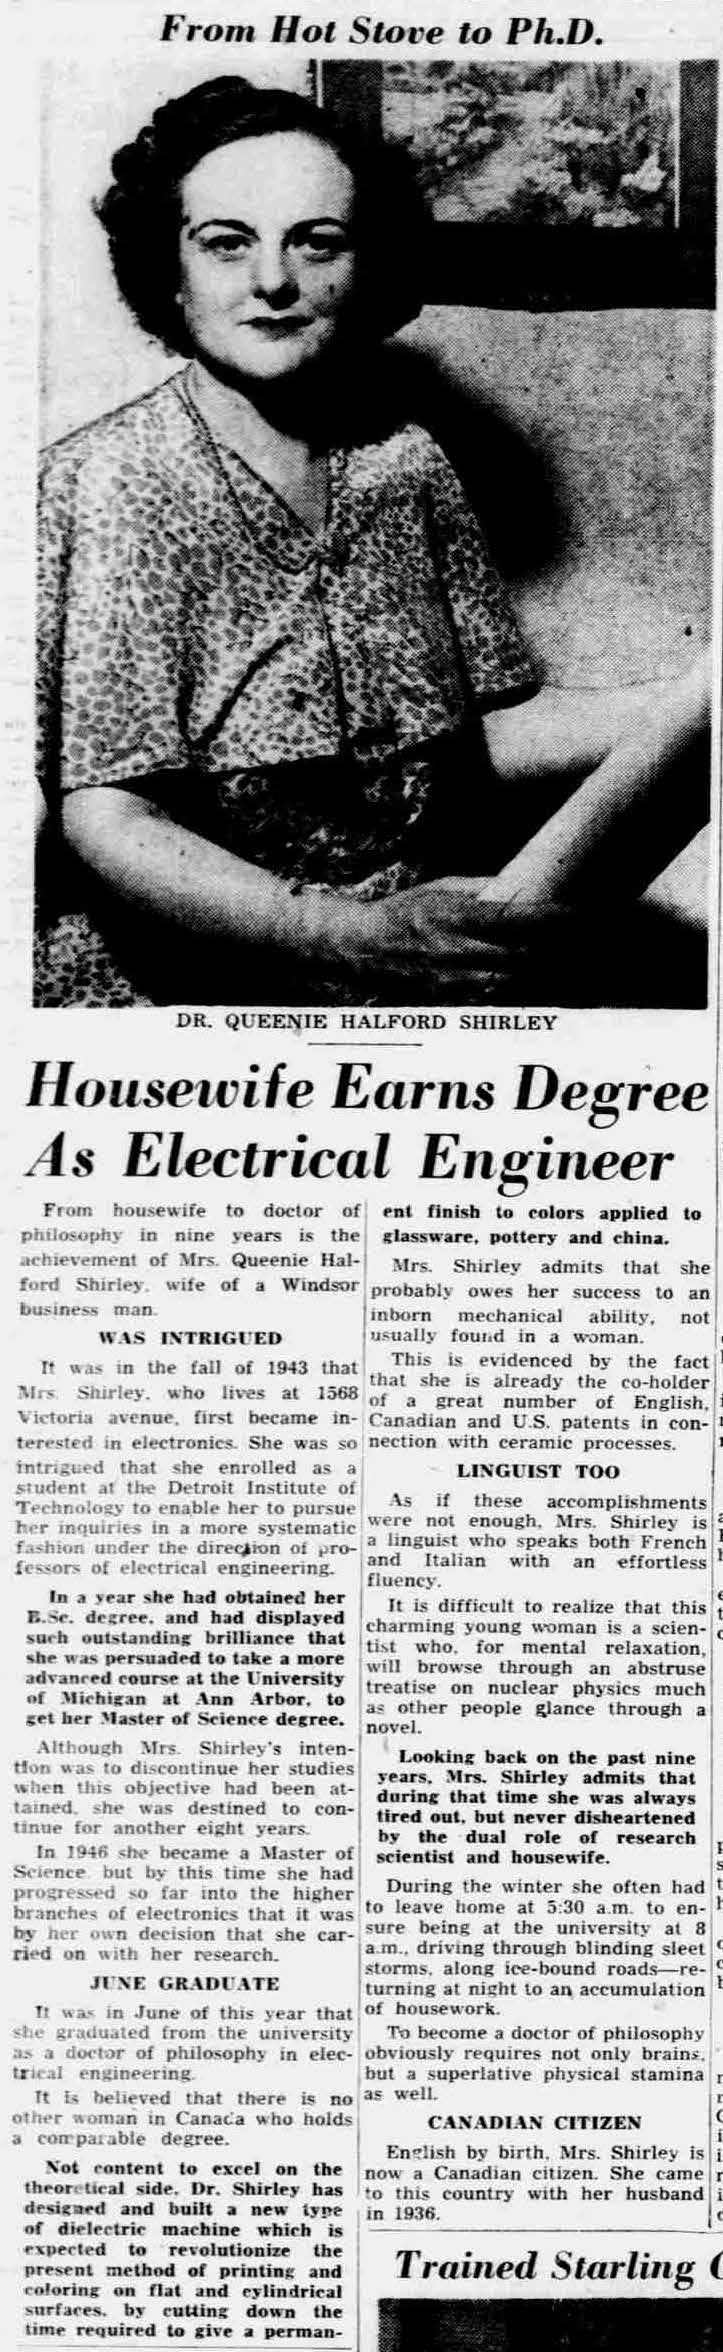 From Hot Stove to Ph.D: Housewife Earns Degree as Electrical Engineer